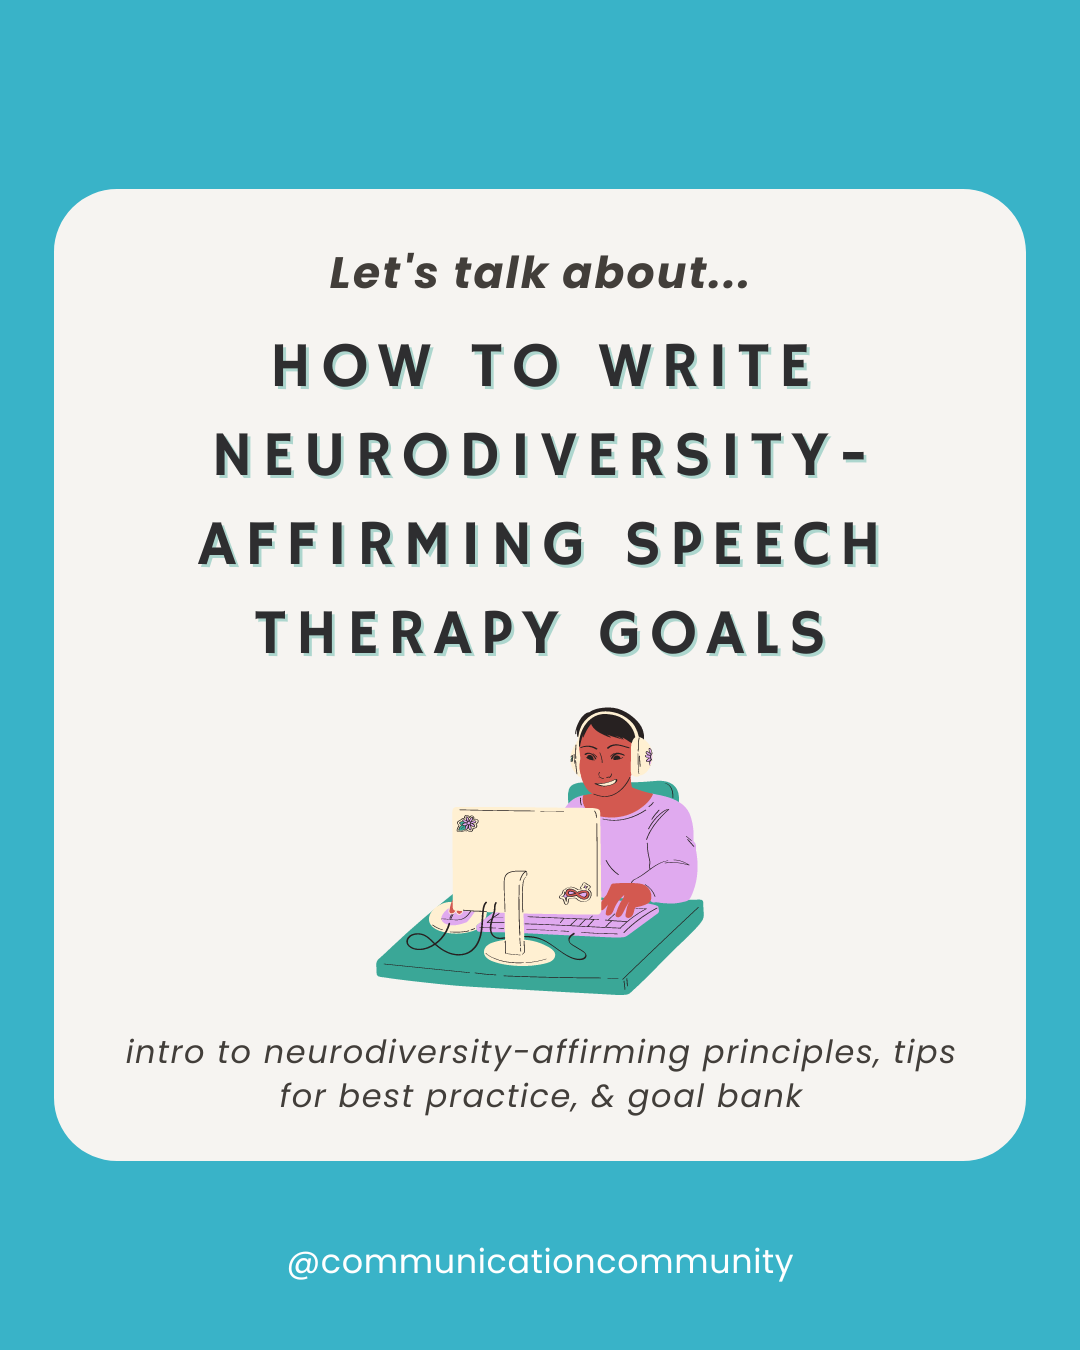 How to Write Neurodiversity-Affirming Speech Therapy Goals [with goal bank]